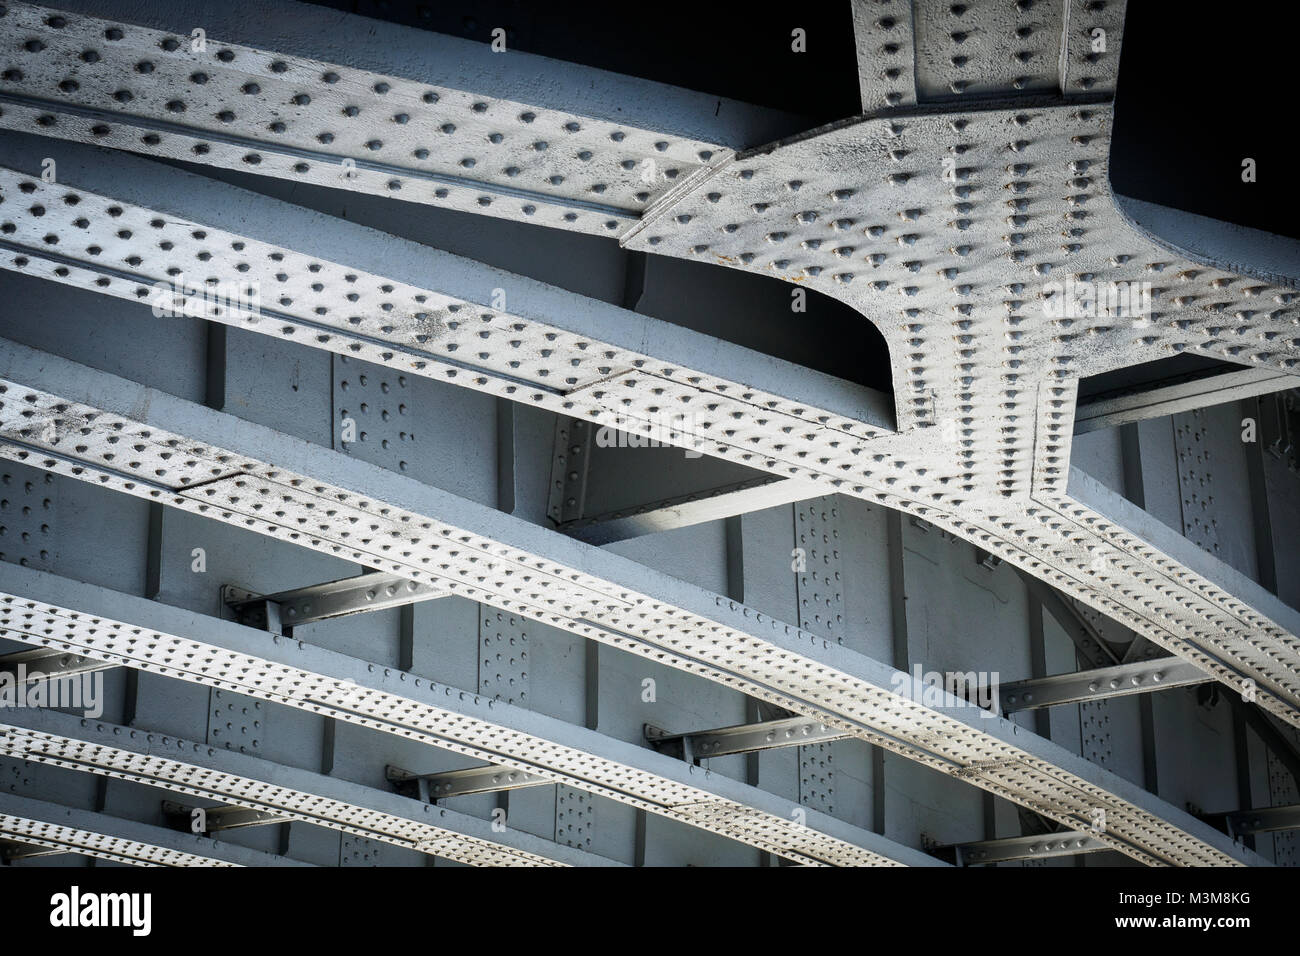 Steel beams on a railway bridge with steel plates and riveted connections. Landscape format. Stock Photo